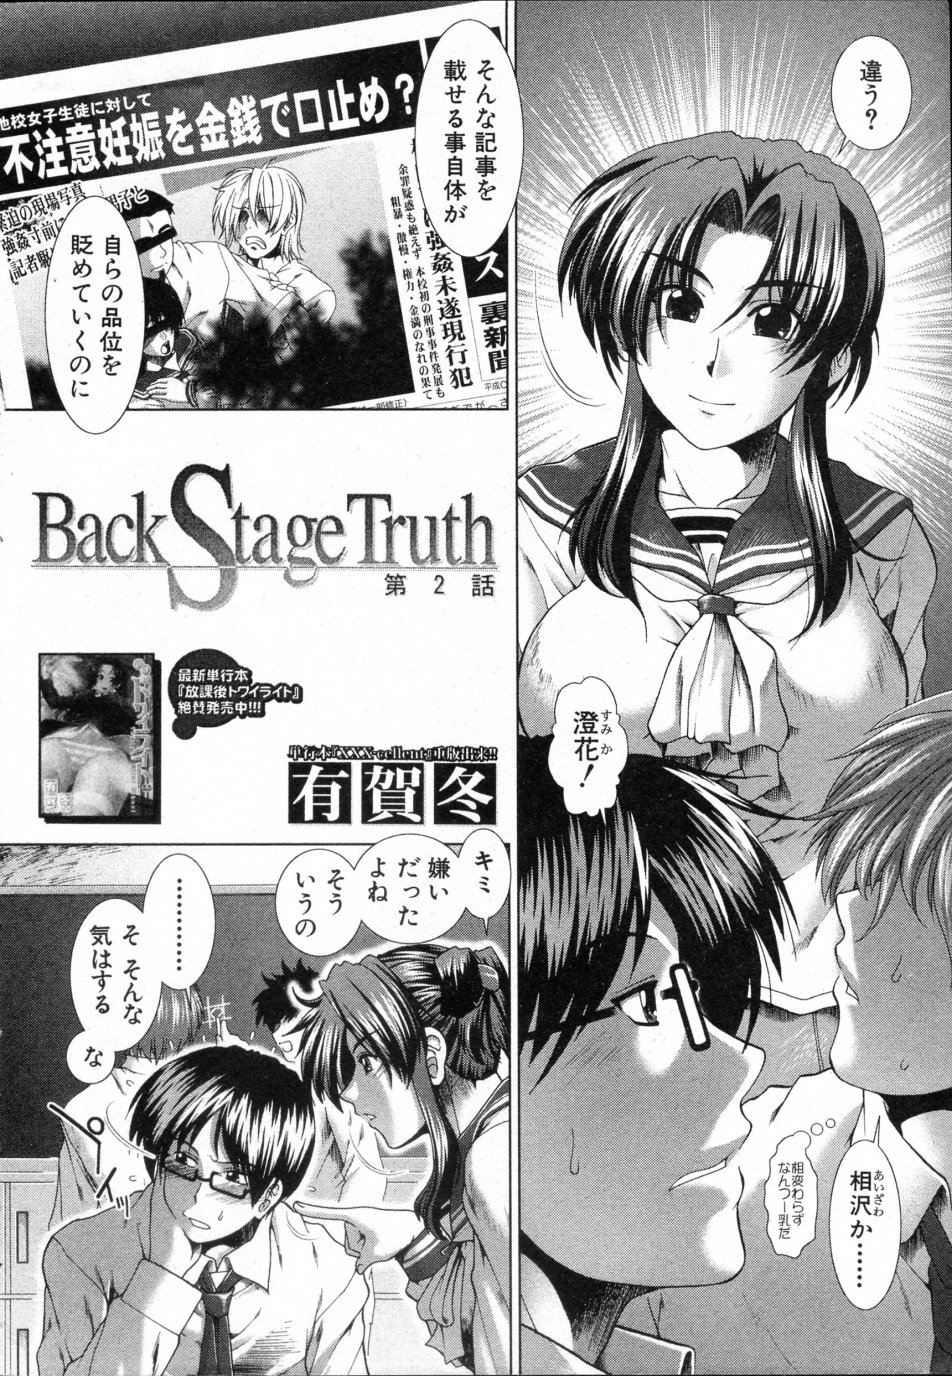 [Ariga Tou] Back Stage Truth Ch.01-03 (Complete) [有賀冬] Back Stage Truth 全3話